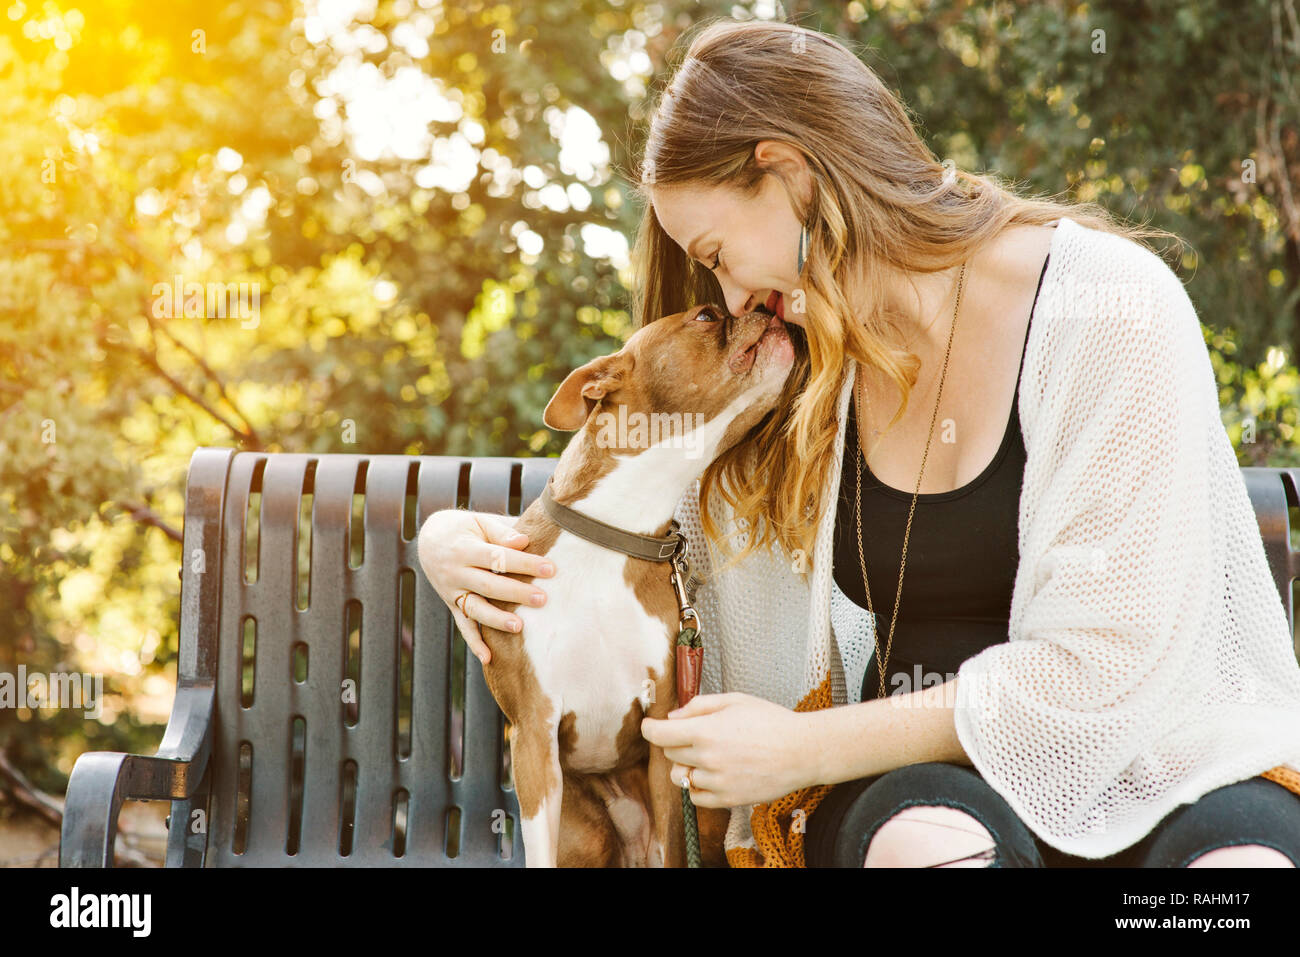 Caucasian female with brown hair kisses her pet dog on a park bench.  Mans best friend.  Loving relationship Stock Photo